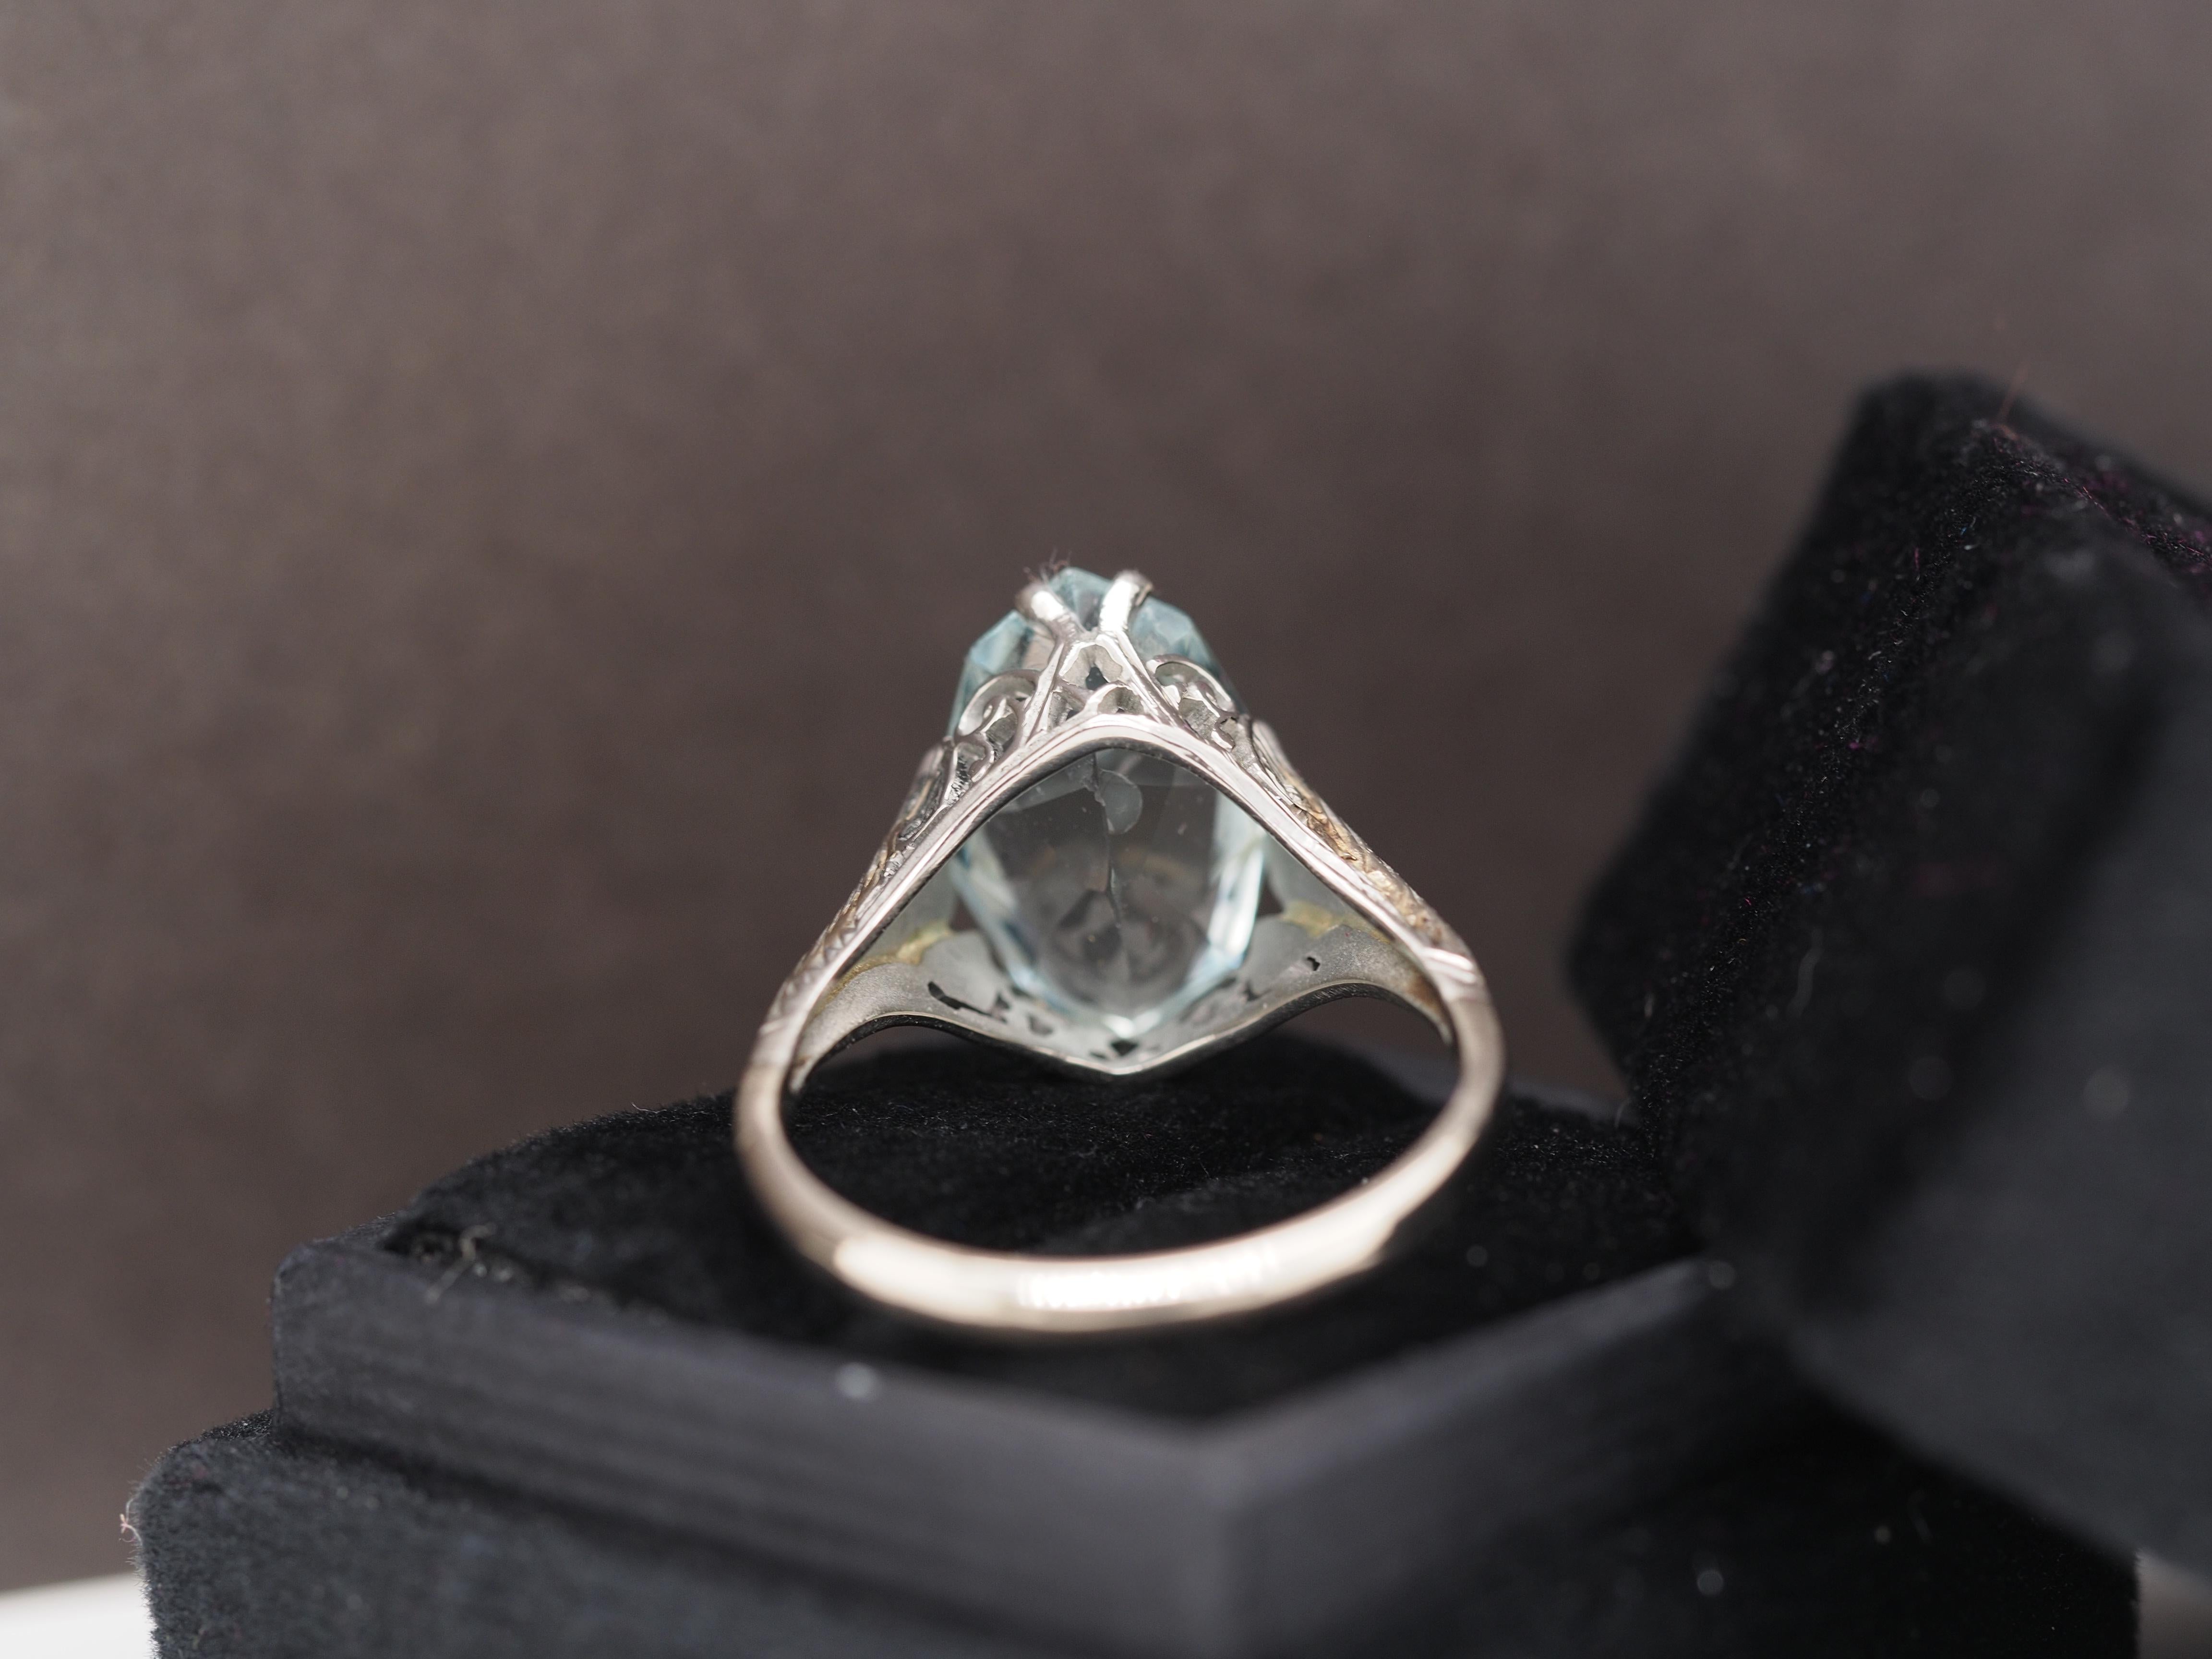 Year: 1930

Item Details:
Ring Size: 8
Metal Type: 18K White Gold [Hallmarked, and Tested]
Weight: 4.3 grams

Aquamarine Details: Light Blue, 3.50ct, Marquise Shape, Natural

Band Width: 2.1 mm
Condition: Excellent

Price: $1000